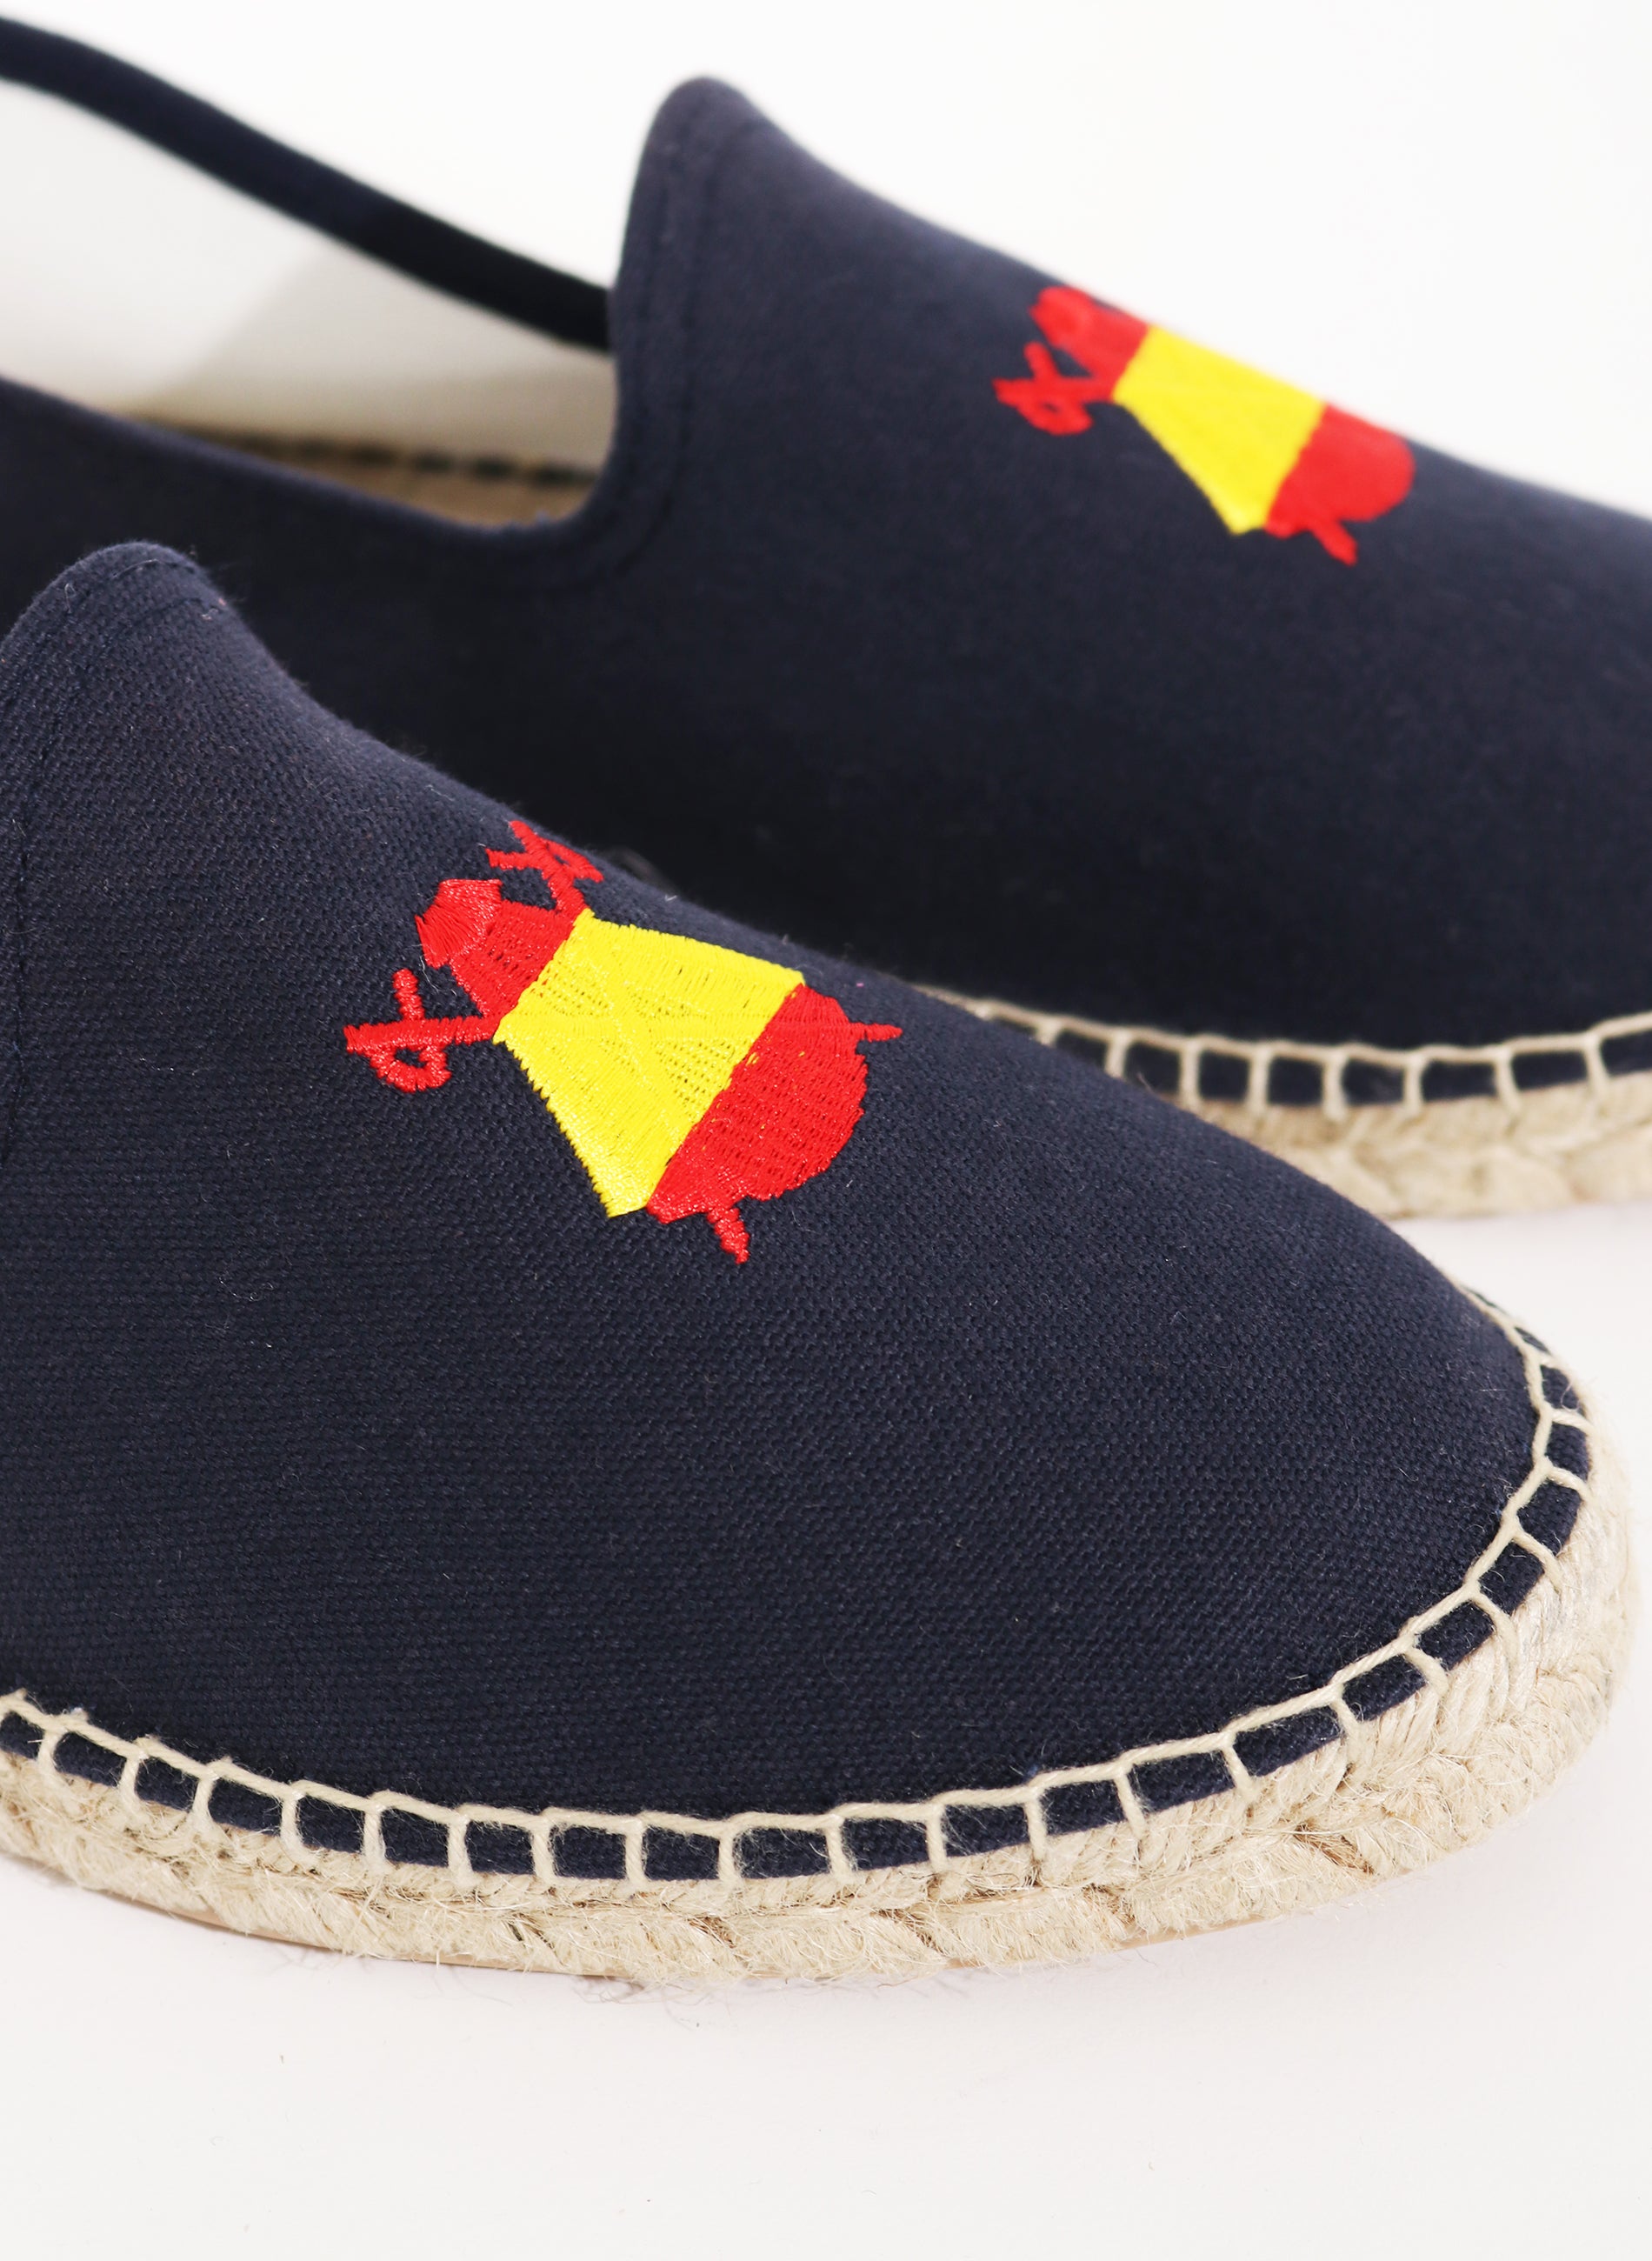 Espadrilles Man Navy Blue Embroidered Pink Cape 